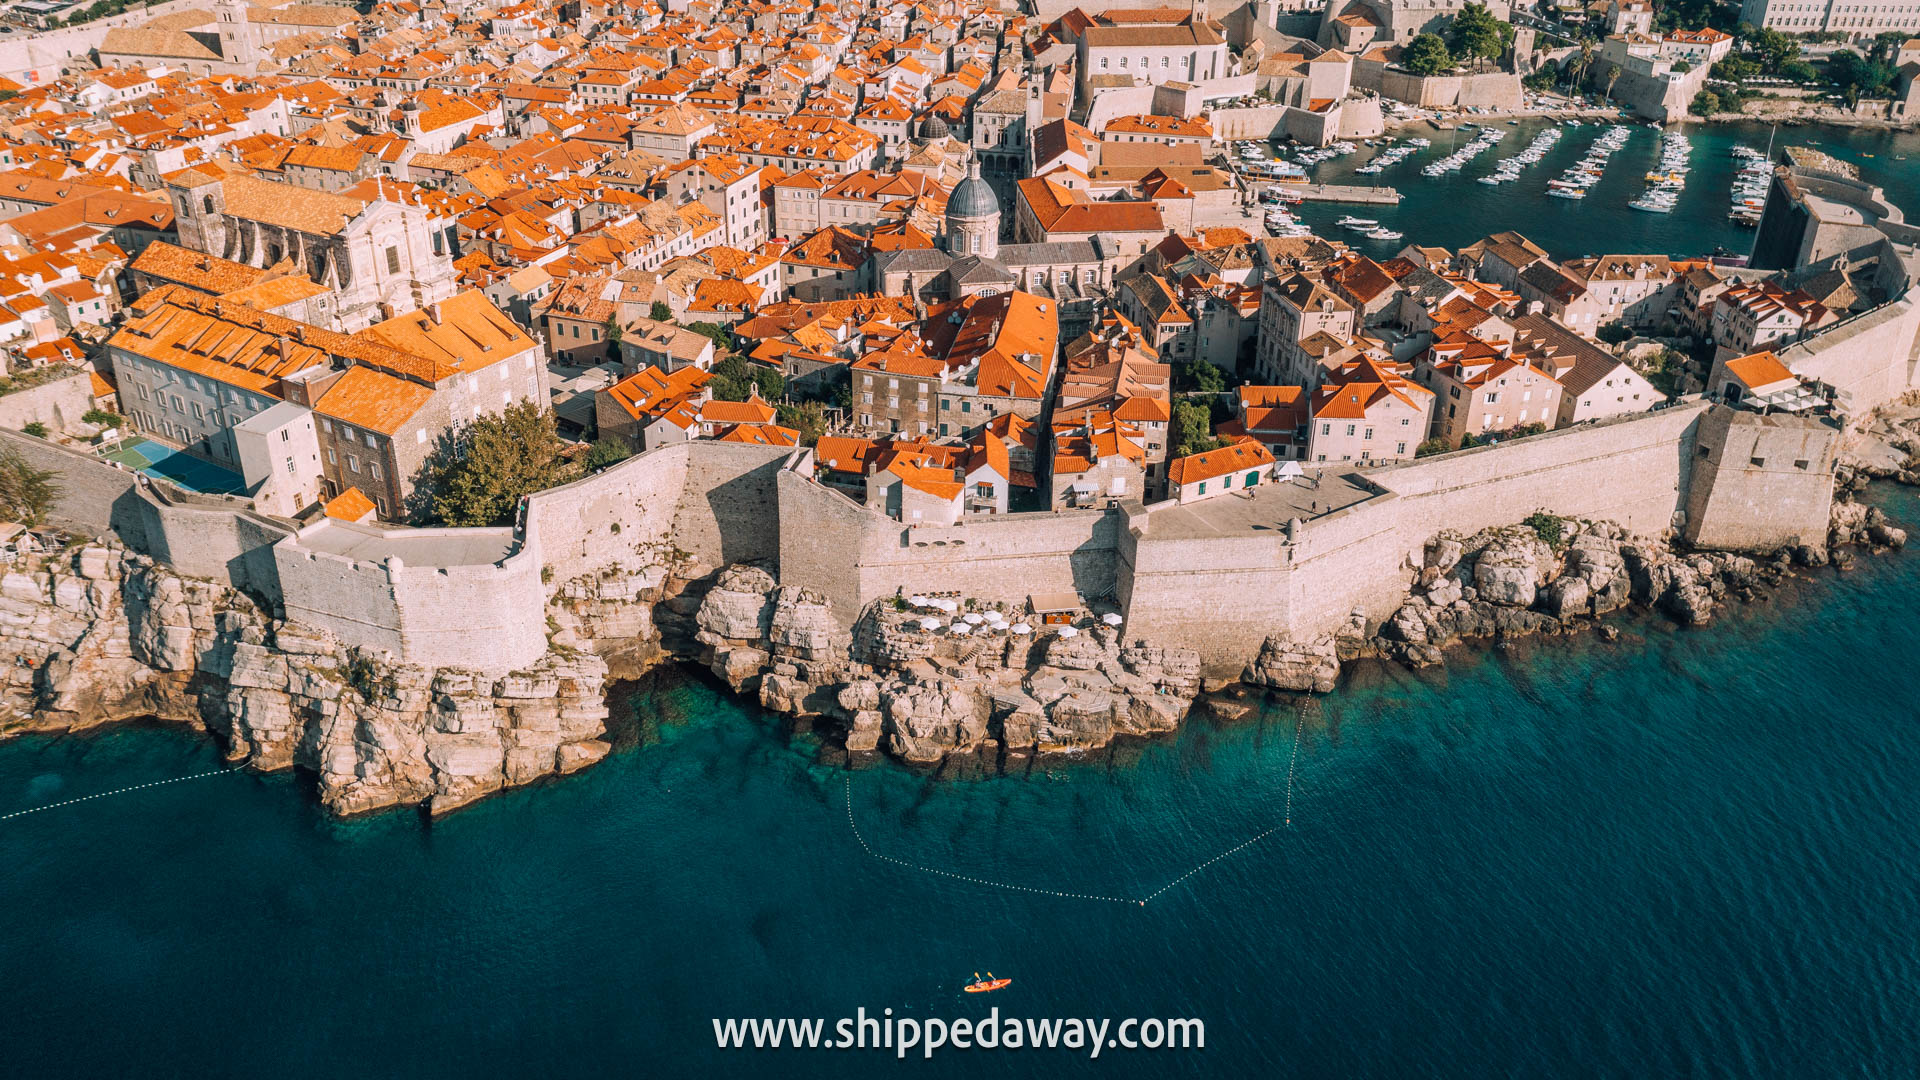 top things to do in dubrovnik, best time to visit dubrovnik, dubrovnik city walls, dubrovnik old town, dubrovnik travel tips, dubrovnik travel guide, dubrovnik croatia, high season in dubrovnik